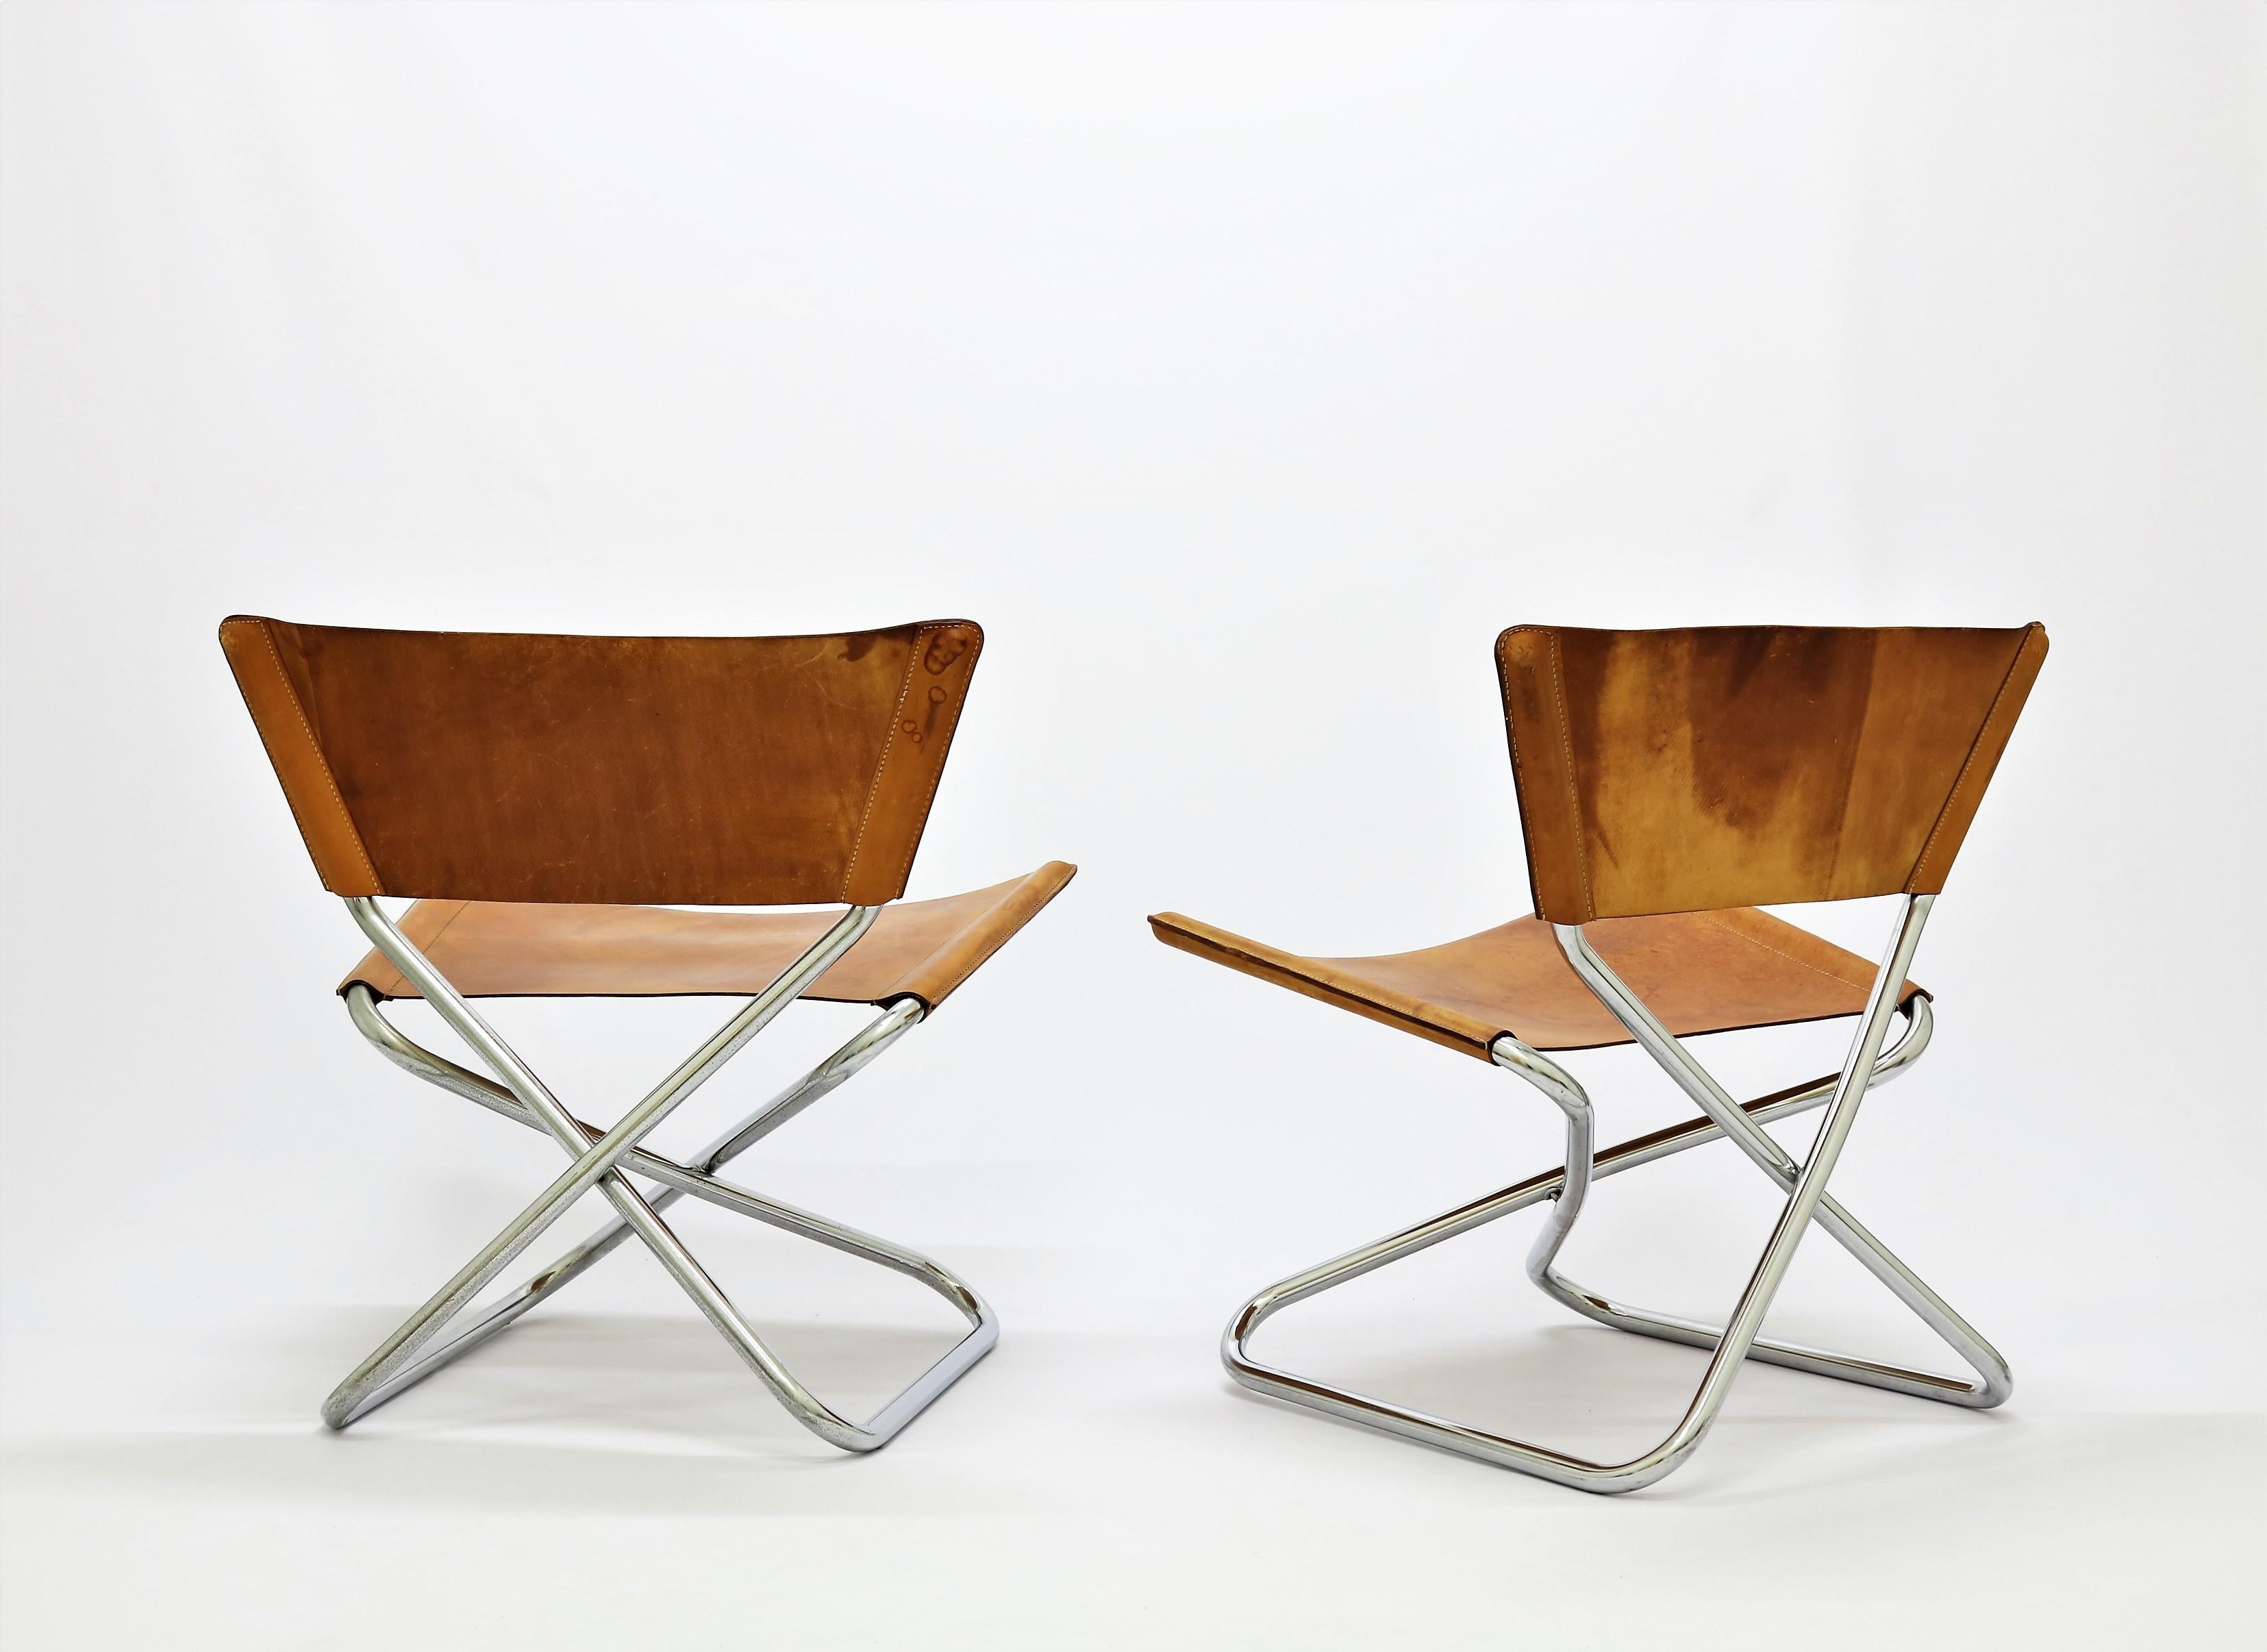 Danish Pair of Lounge Chairs in Saddle Leather and Steel by Erik Magnussen, Denmark